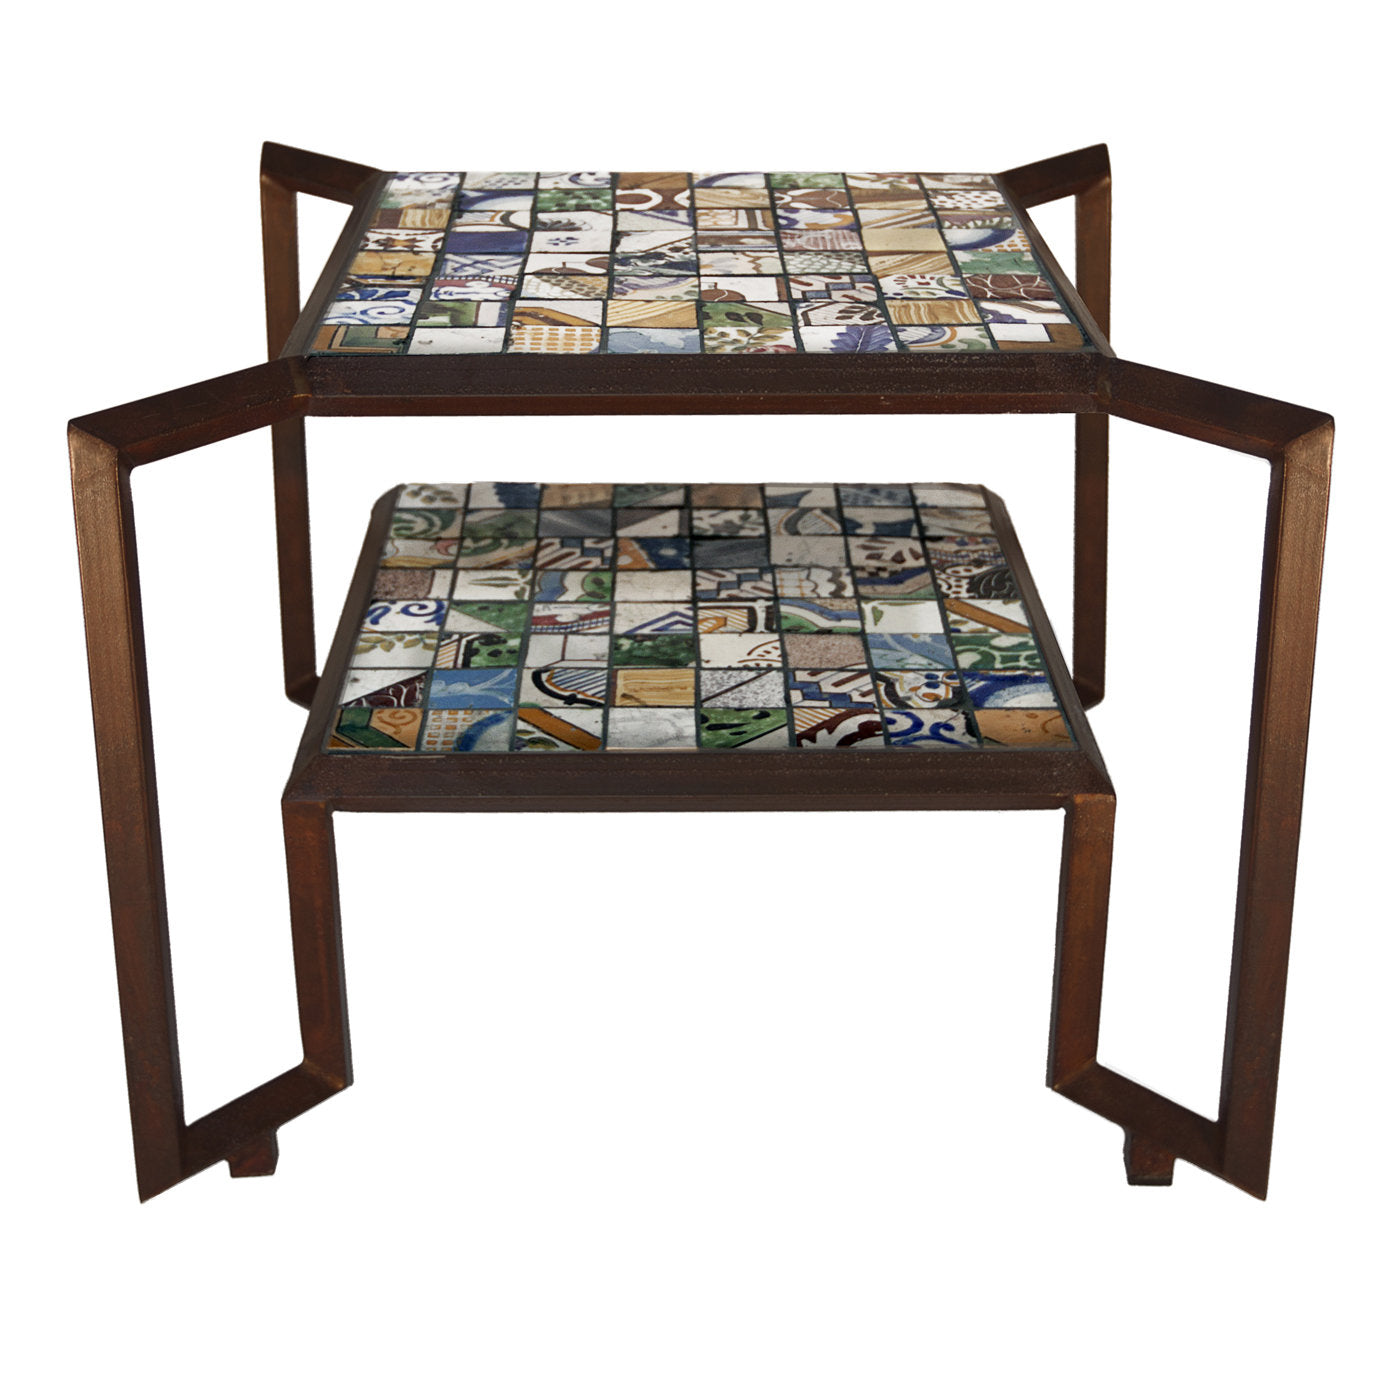 Spider Mosaic Tile Table - Main view